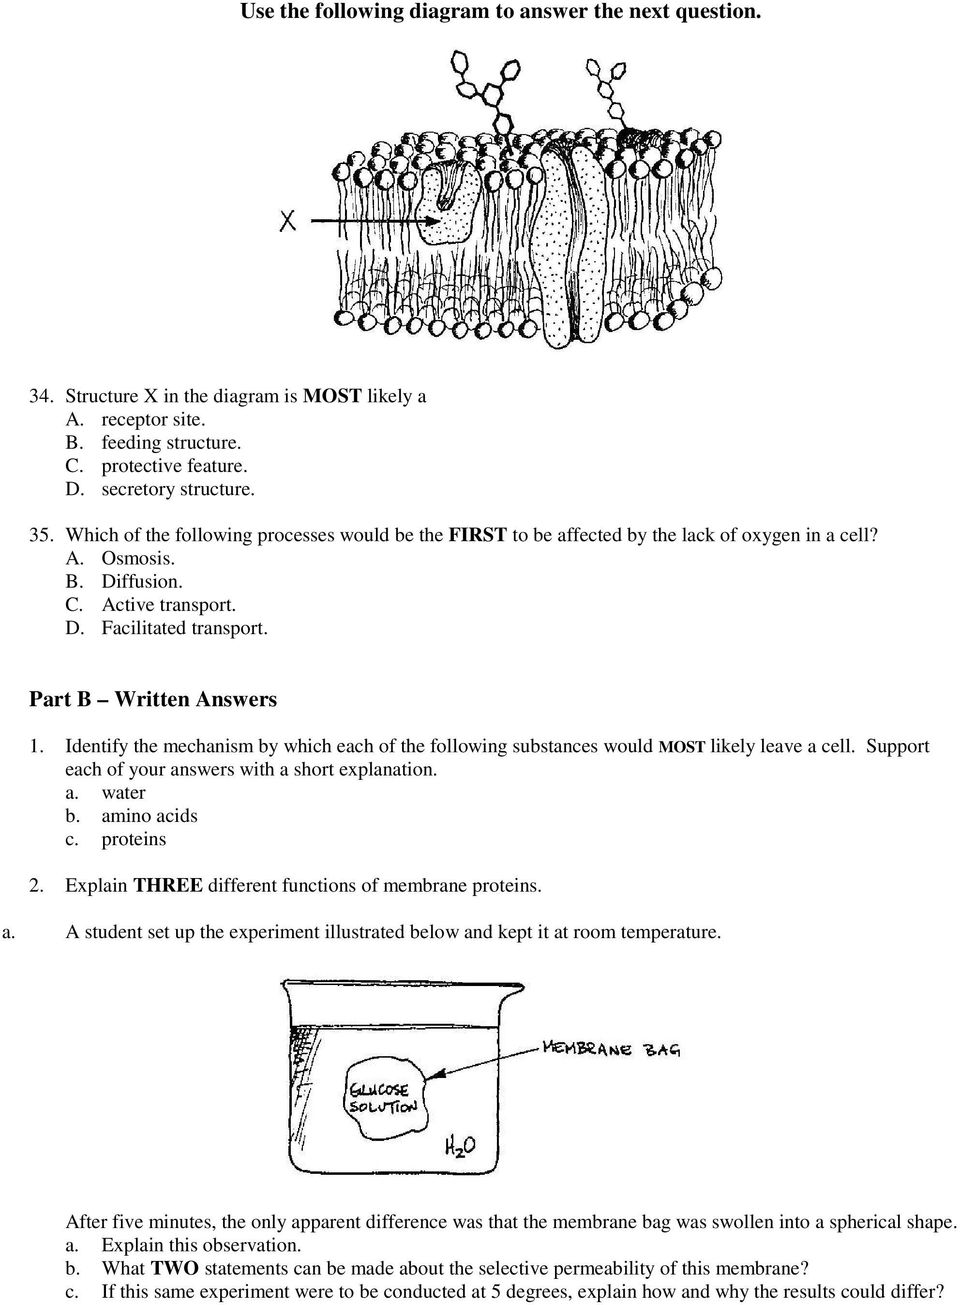 Membrane Structure and Function - PDF Free Download Within Membrane Structure And Function Worksheet